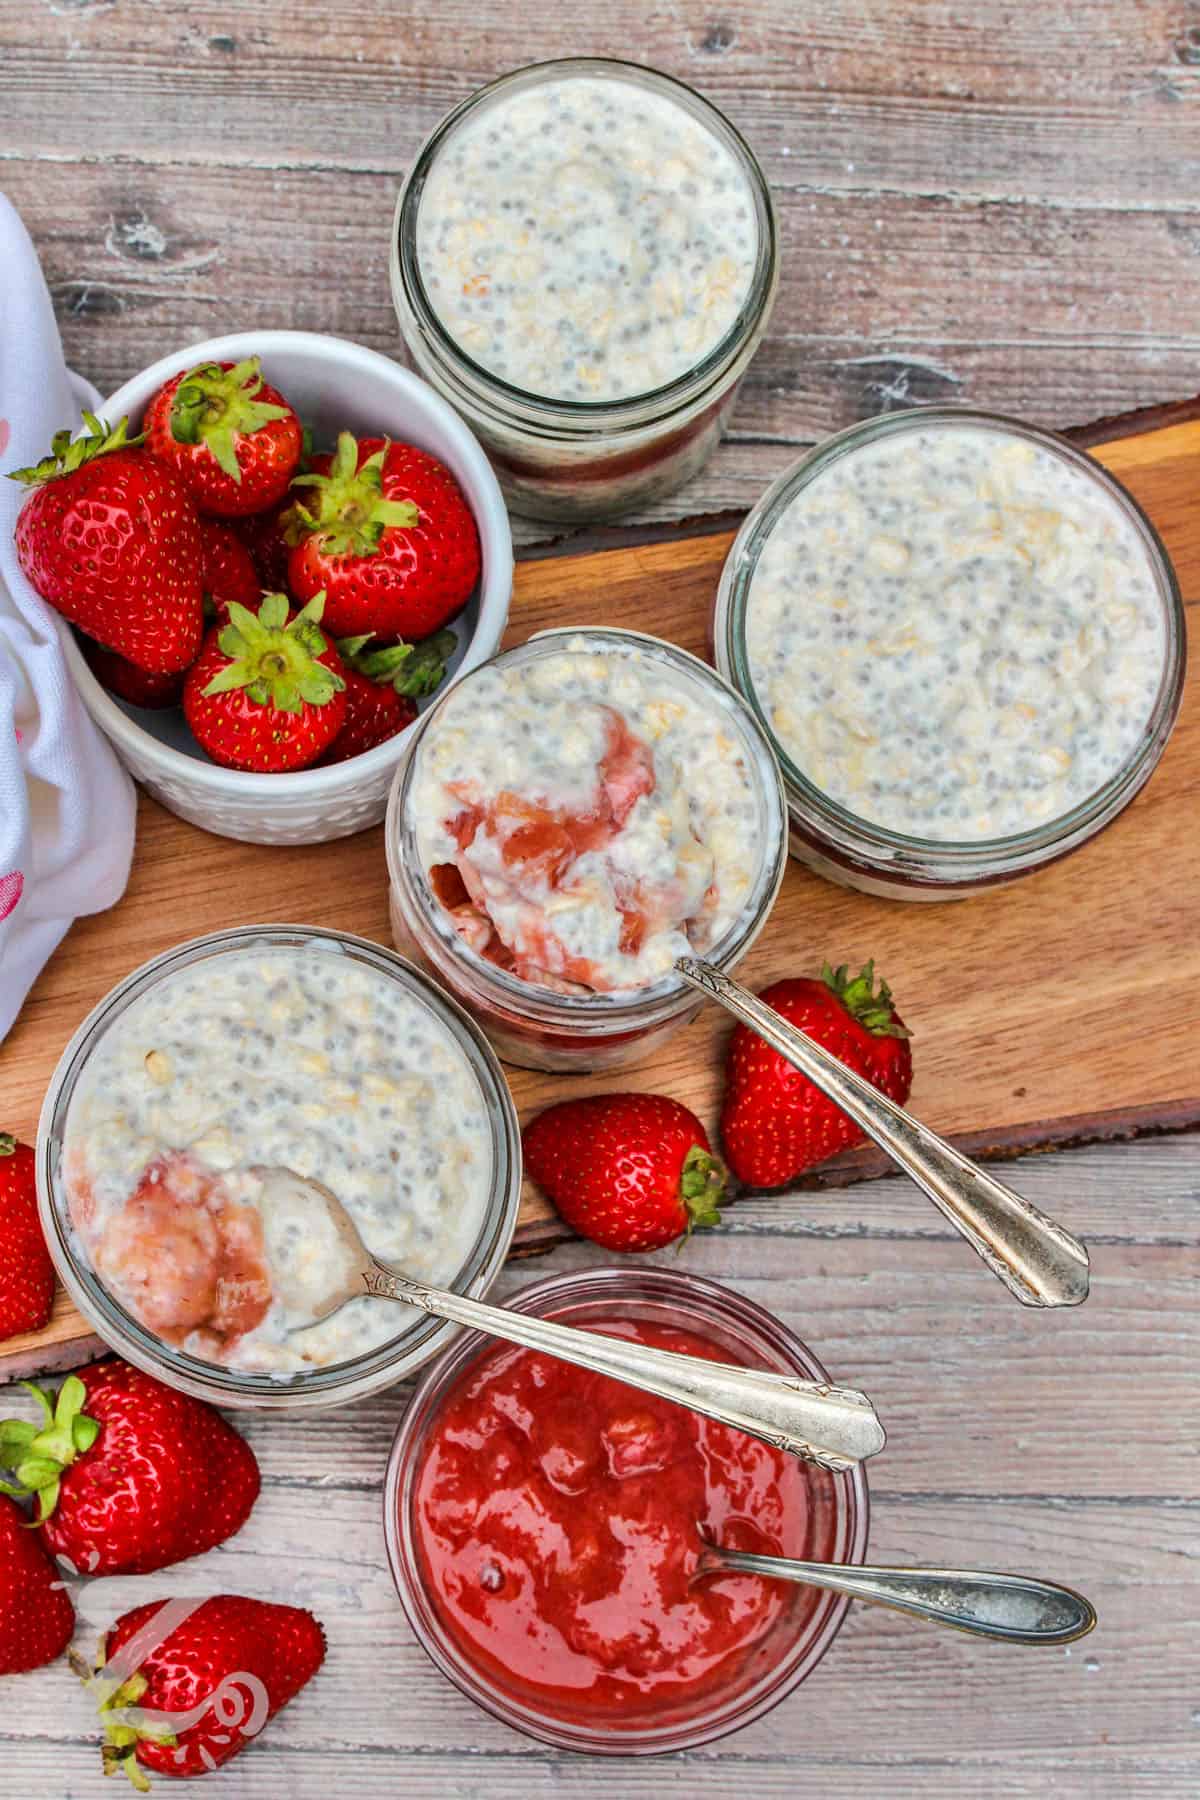 jars of Overnight Oats with spoons and a bowl of strawberries